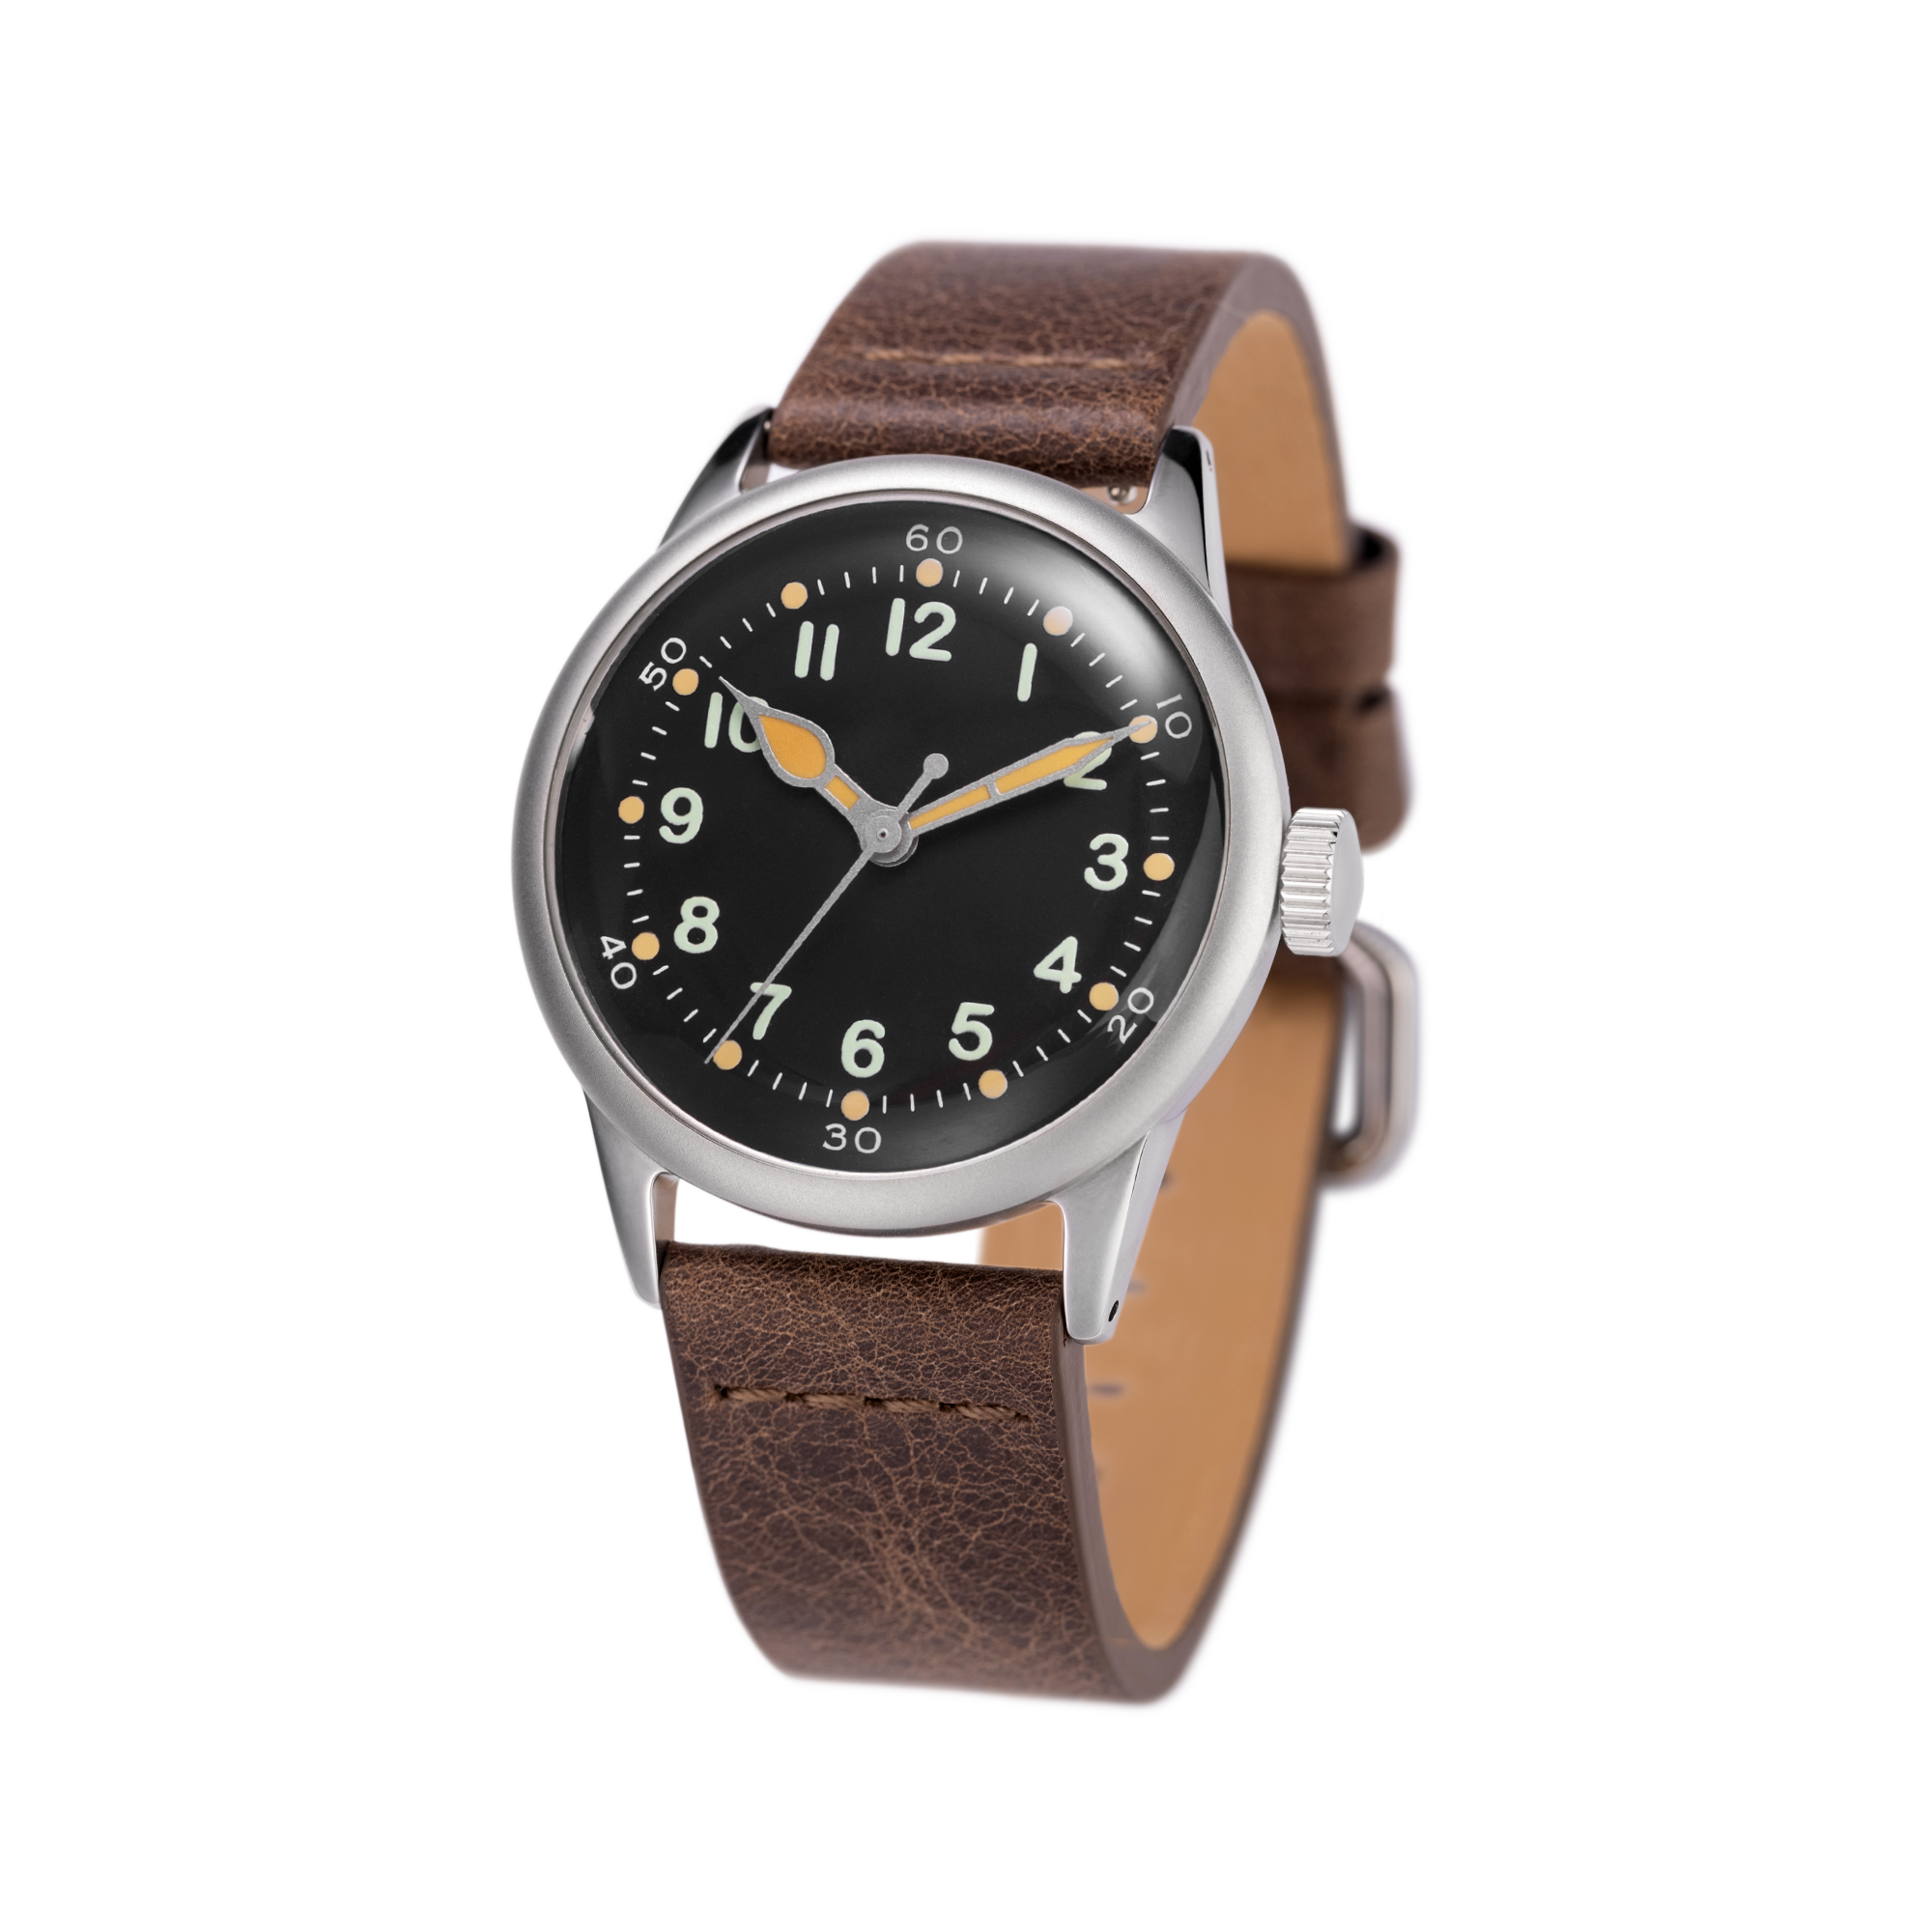 Black Dial Military Watch With Canvas Strap Tom Rice